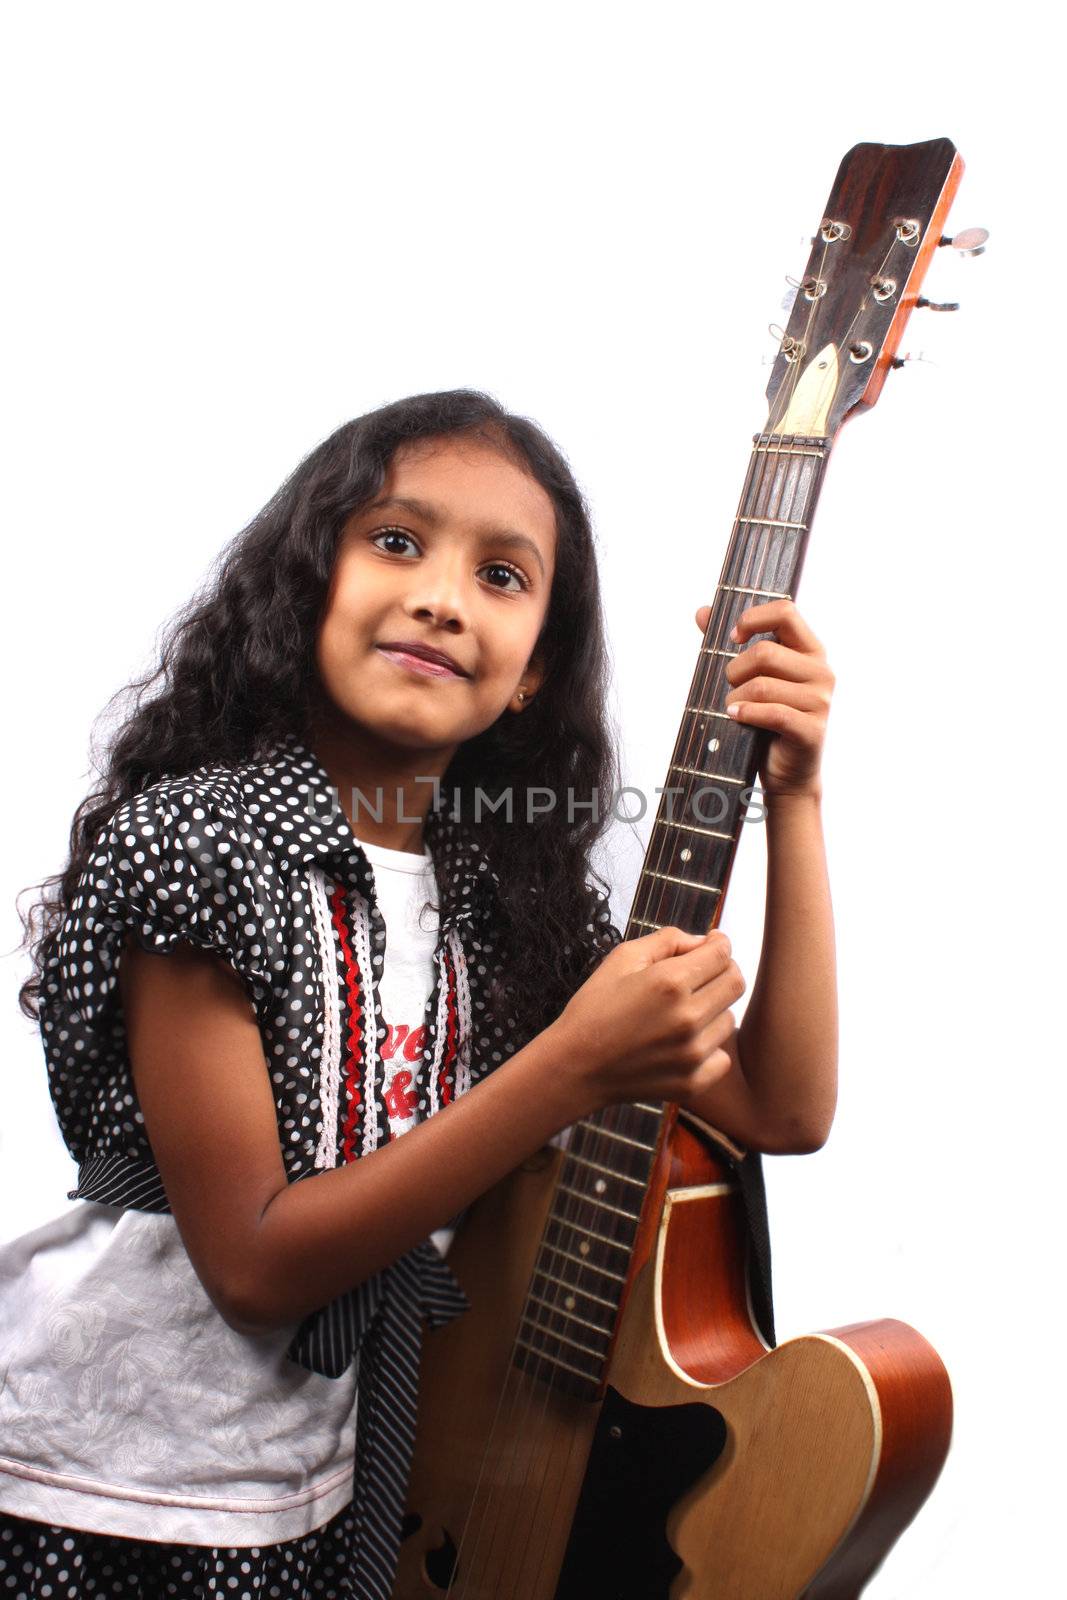 A young Indian girl with her guitar, on white studio background.